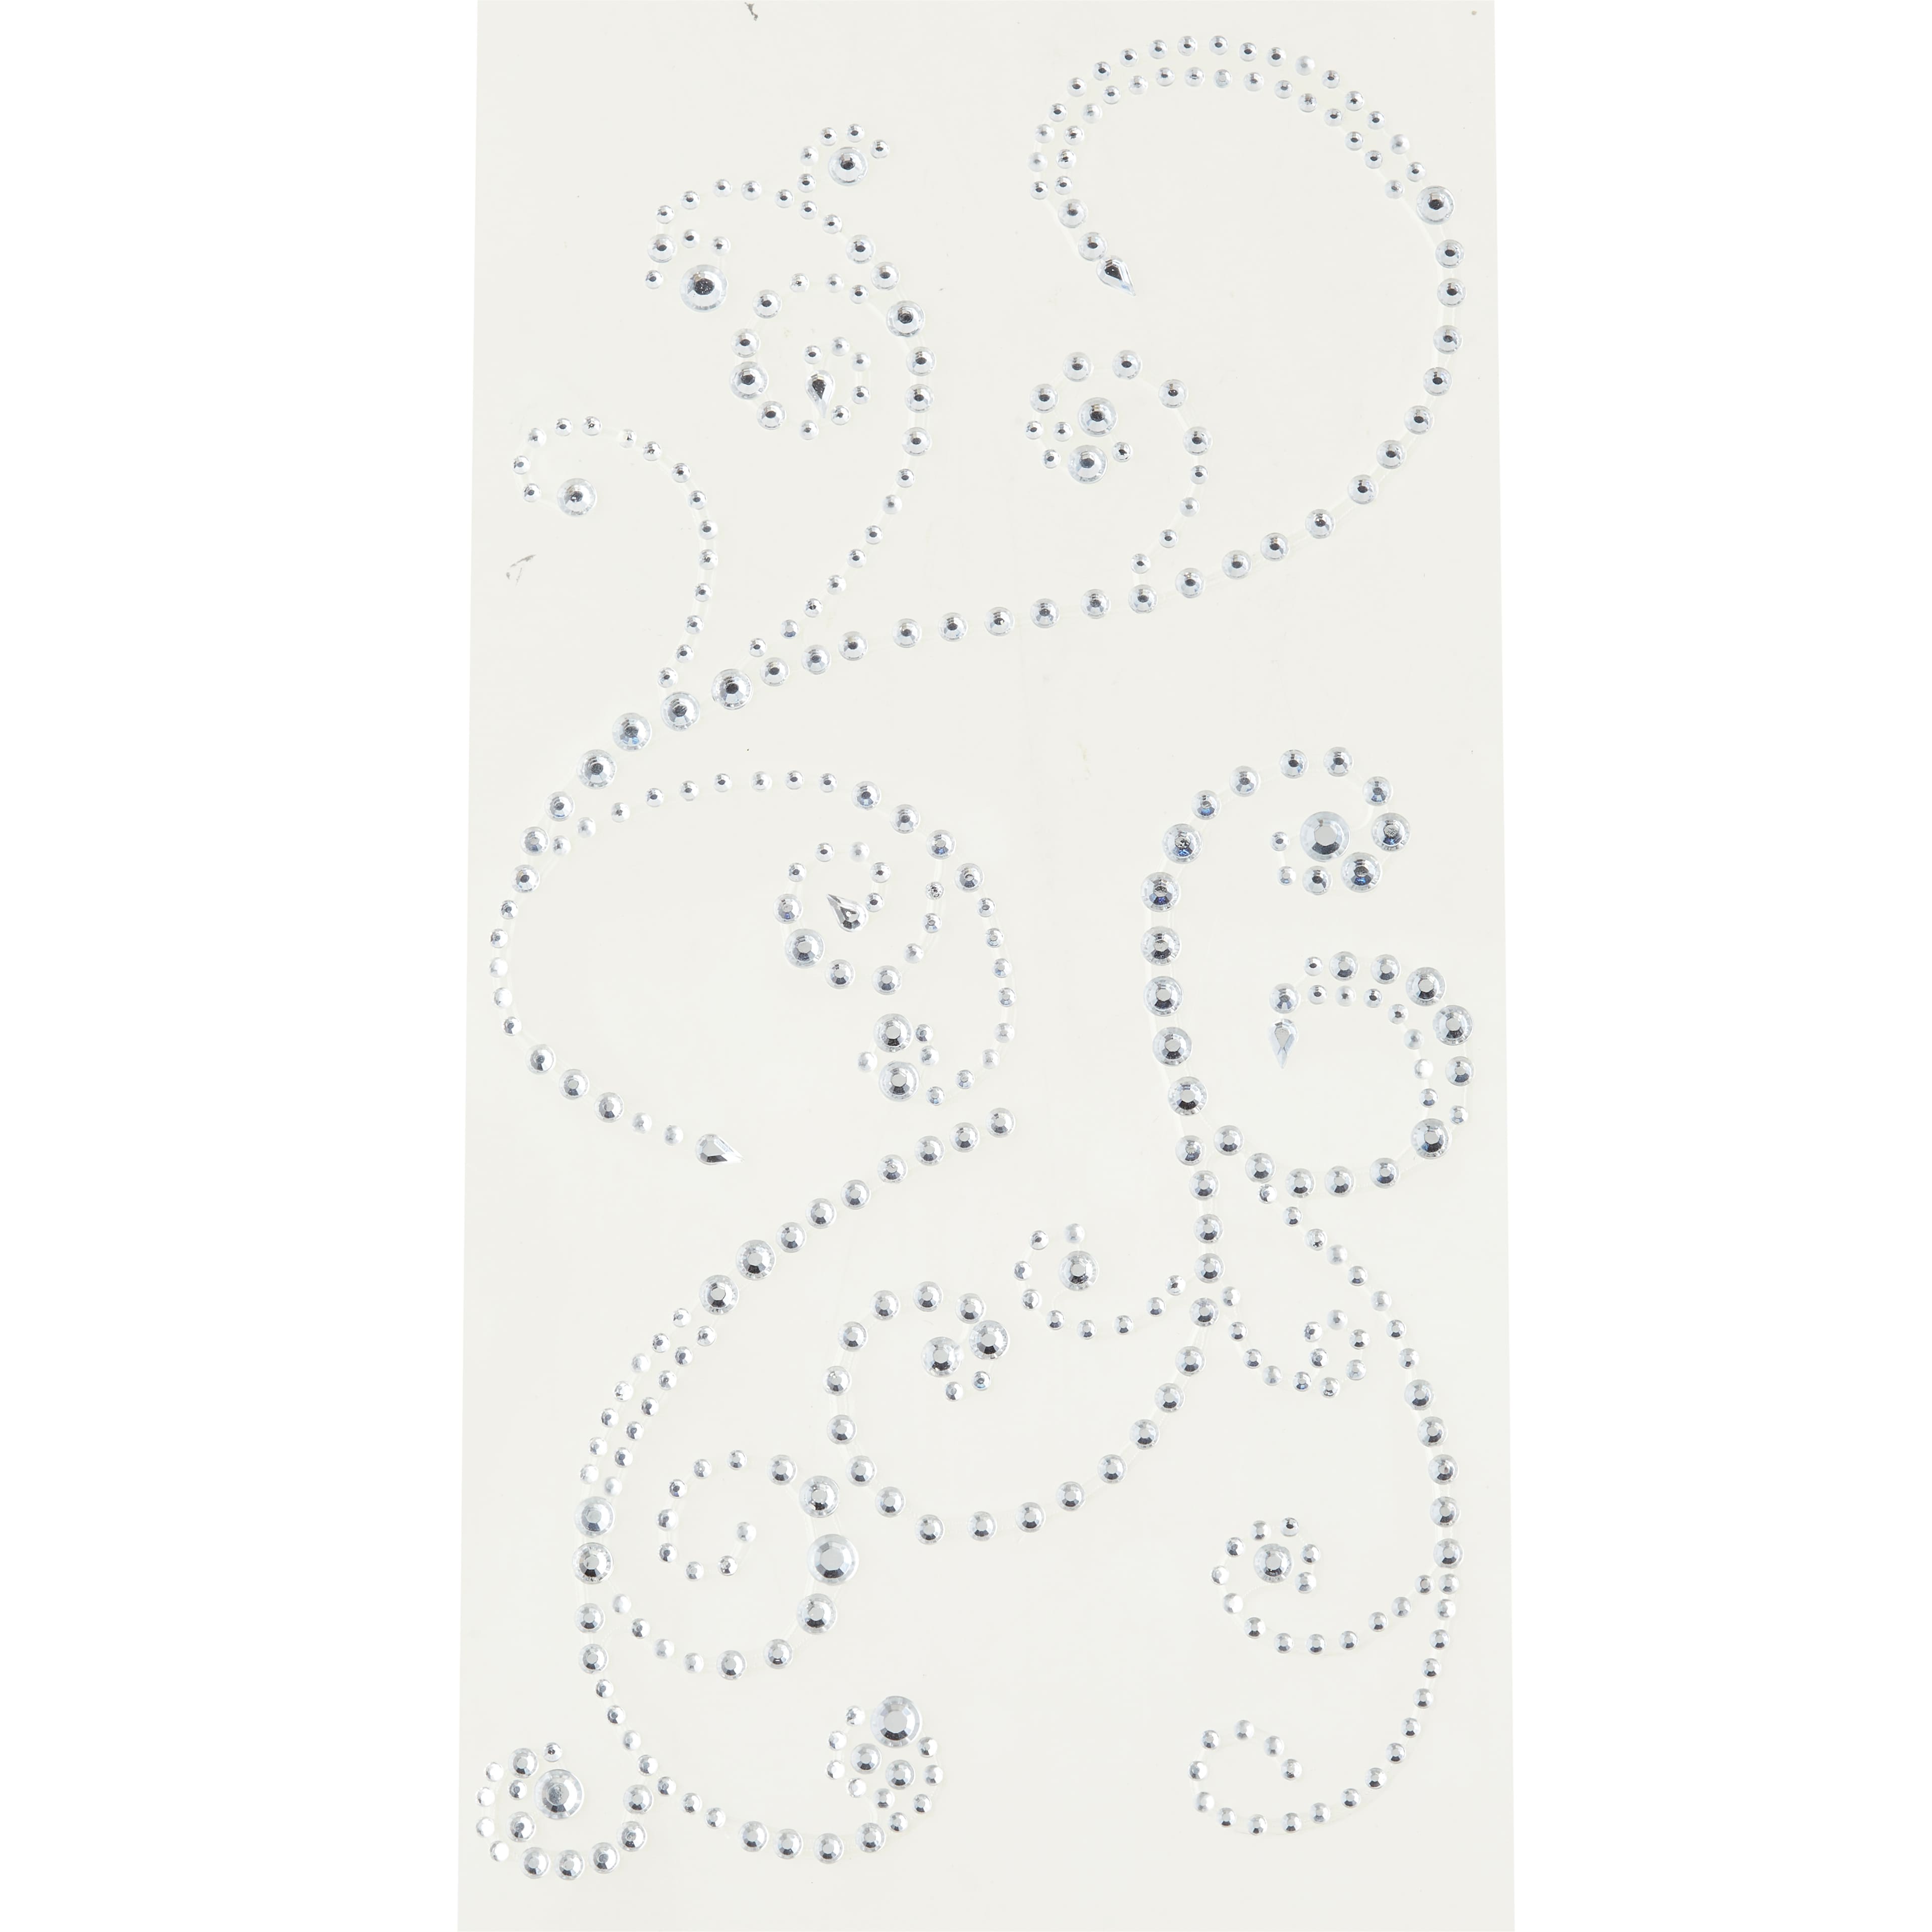 Recollections™ Adhesive Rhinestones, Small Clear Flourishes